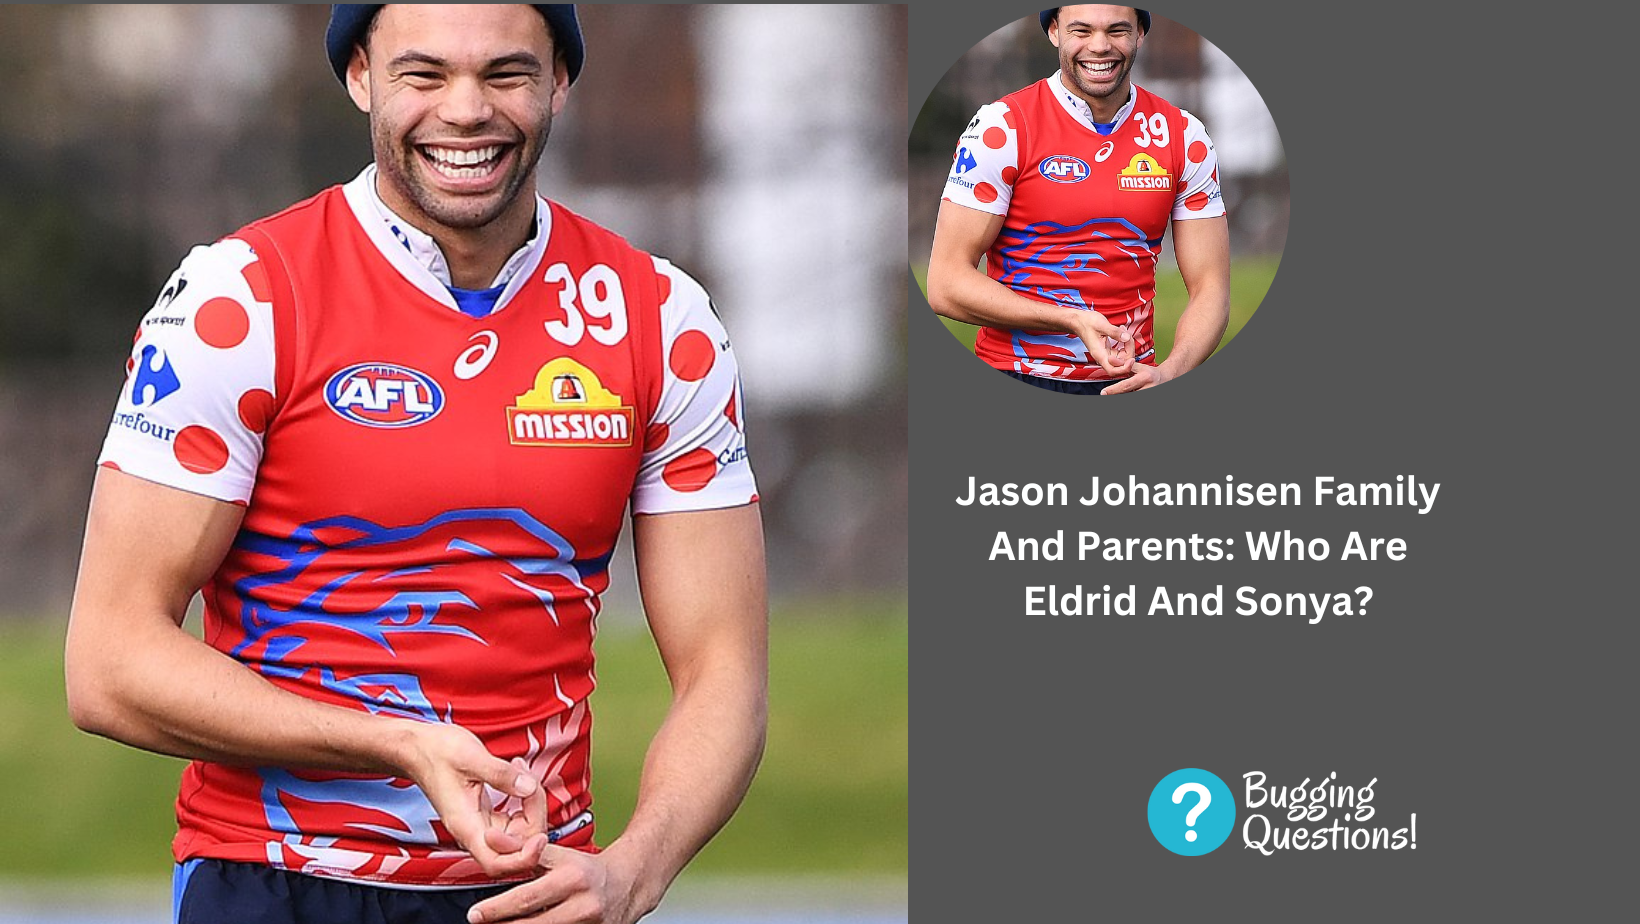 Jason Johannisen Family And Parents: Who Are Eldrid And Sonya?